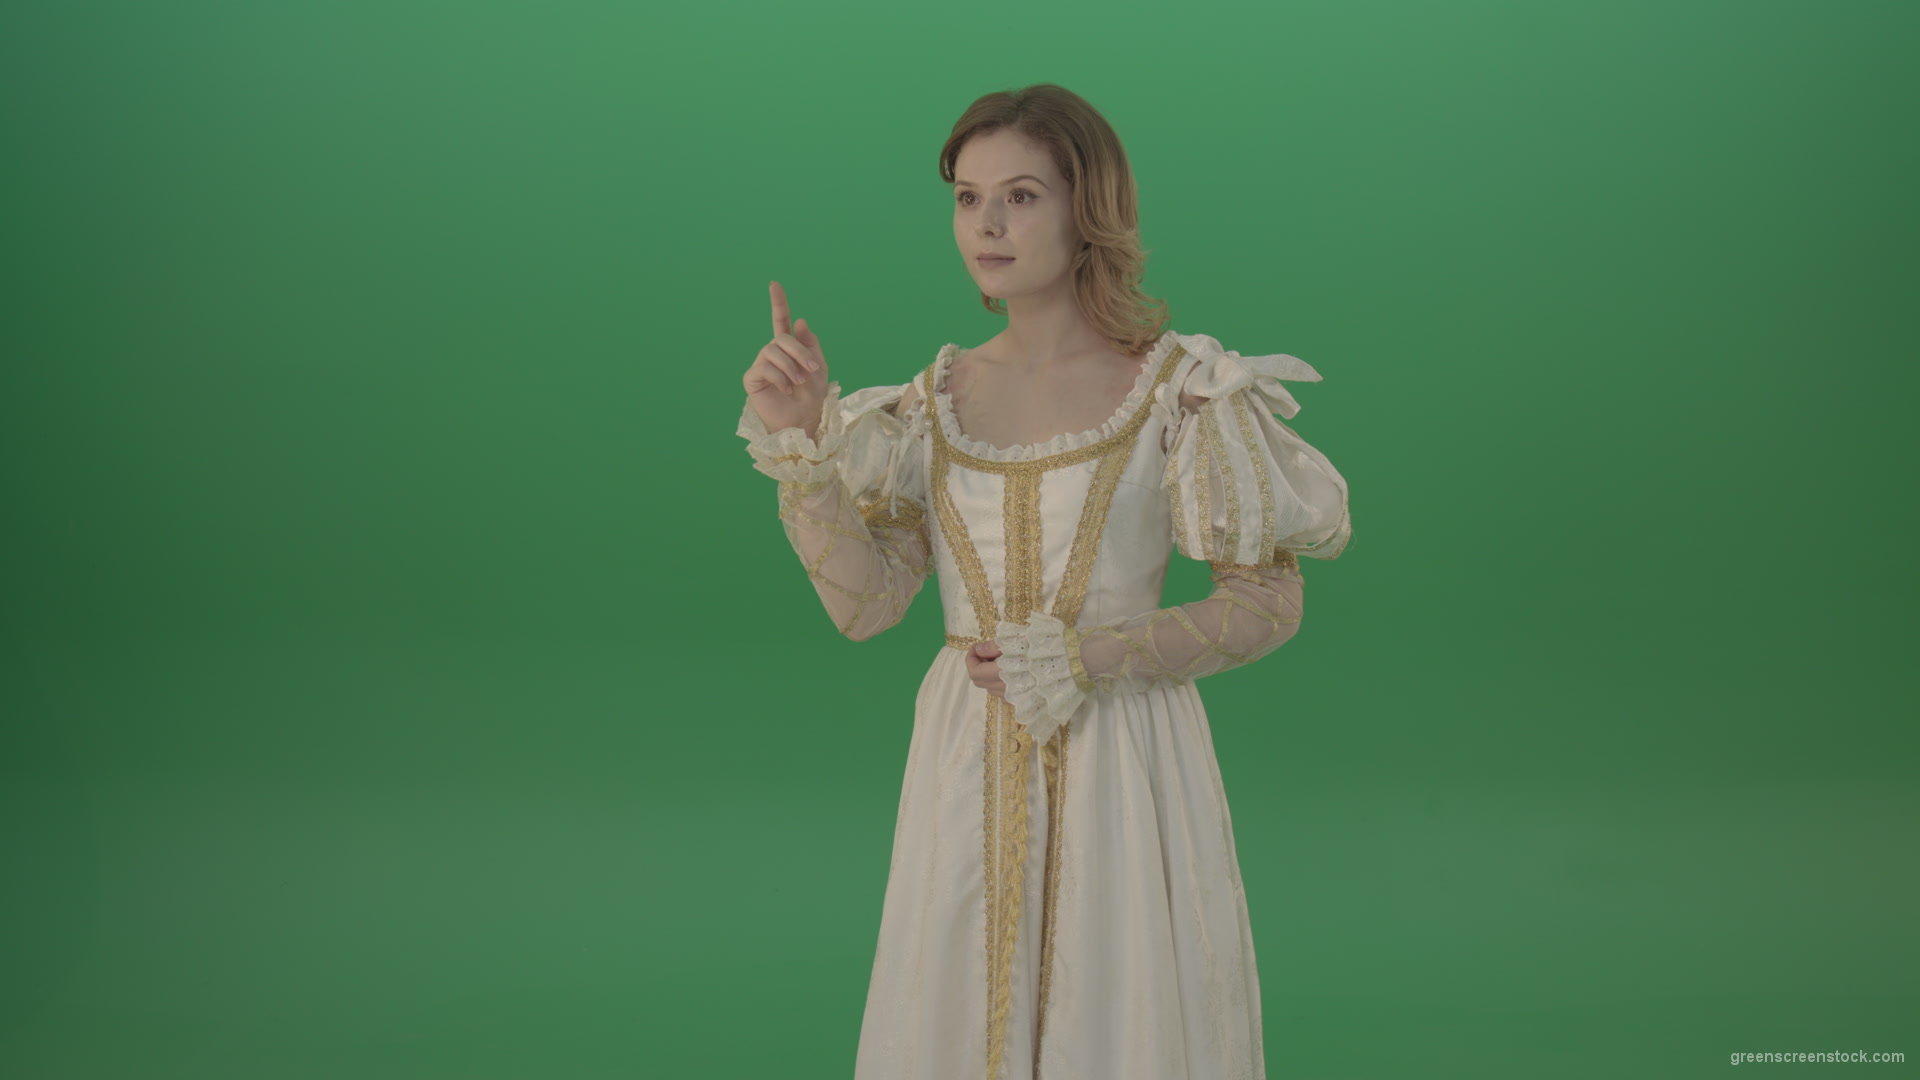 Flipping-a-virtual-reality-screen-the-girl-gladly-looks-at-the-photo-isolated-on-green-screen_005 Green Screen Stock